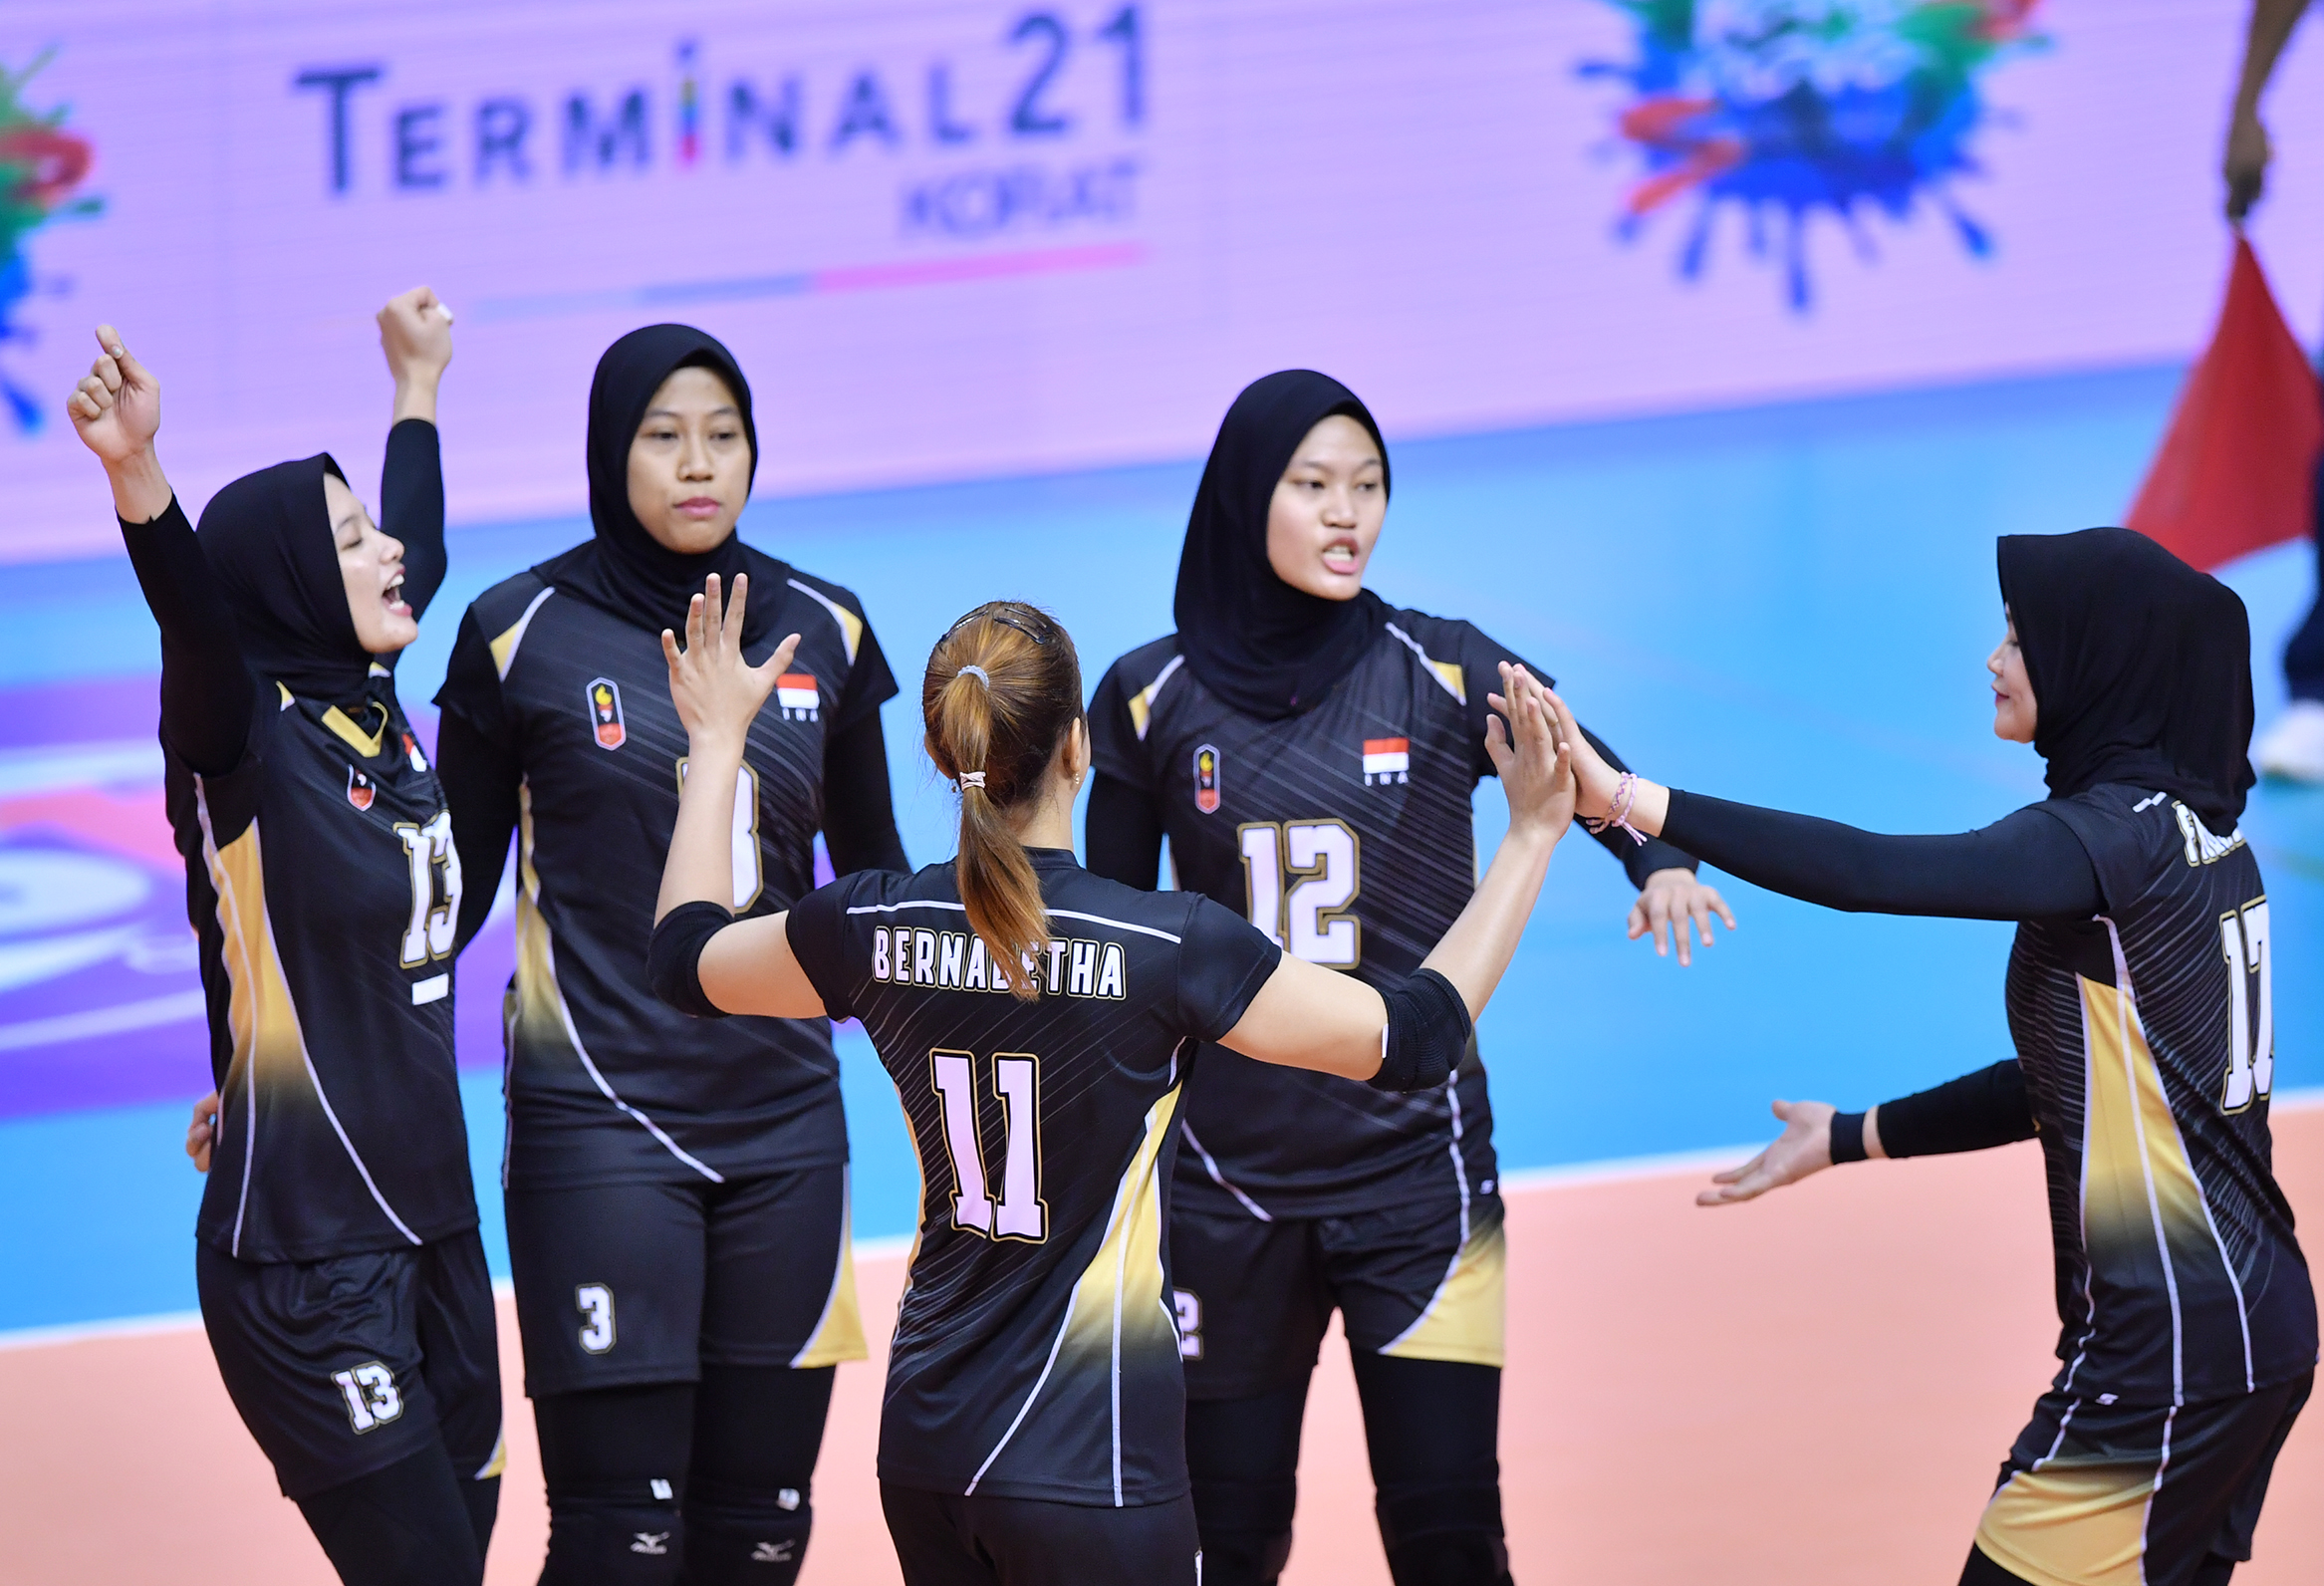 INDONESIA FINISH JOURNEY AT AVC WOMEN’S TOKYO VOLLEYBALL QUALIFICATION WITH TOUGH FIVE-SET WIN OVER WINLESS IRAN